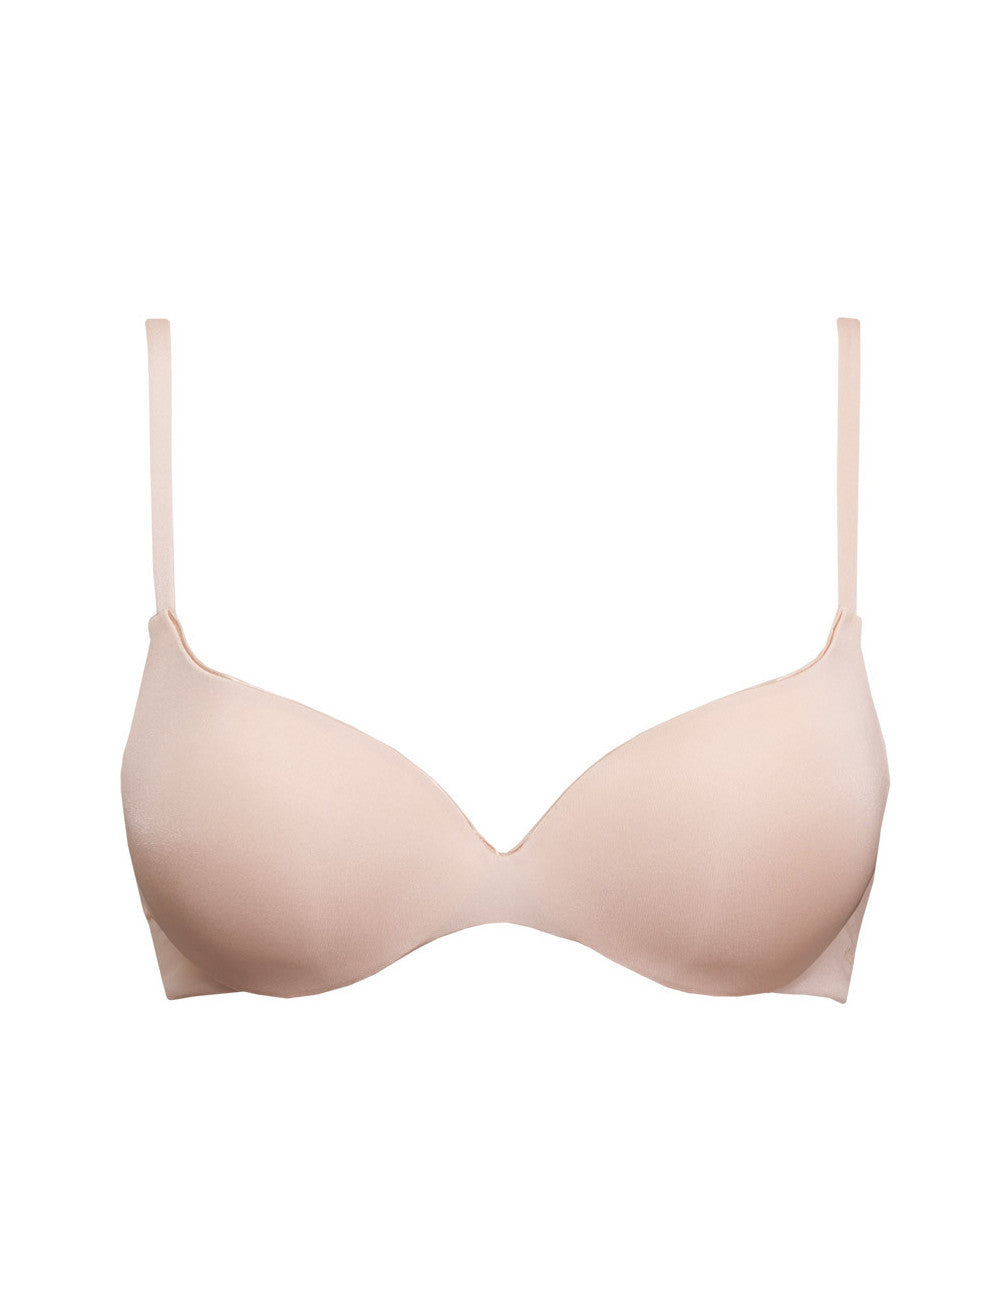 This bra from SIéLEI of Italy is crafted from lightweight microfiber fabric for unrivaled comfort. Seamless construction and silky feel guarantee a smooth fit that is perfect for combining with any look